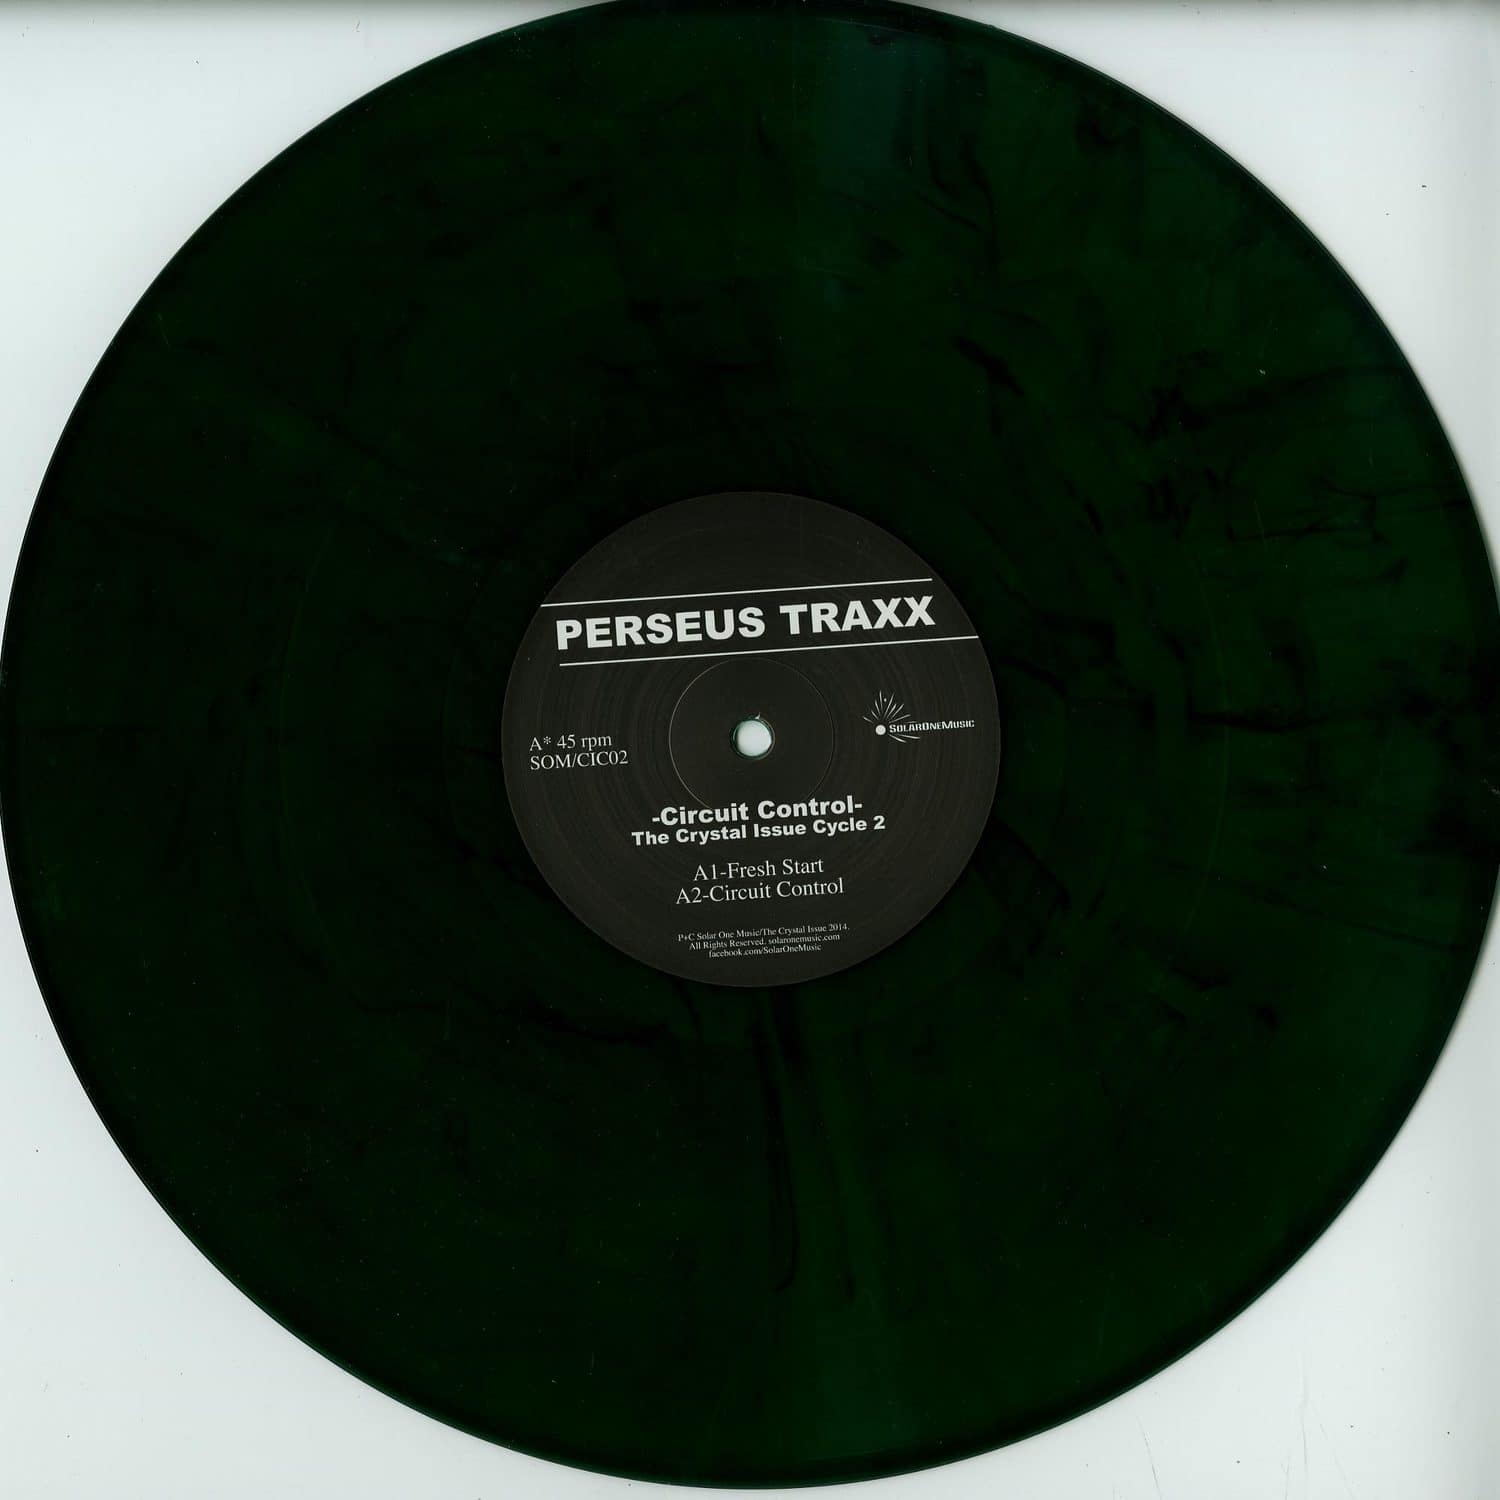 Perseus Traxx - CIRCUIT CONTROL - THE CRYSTAL ISSUE CYCLE 2 